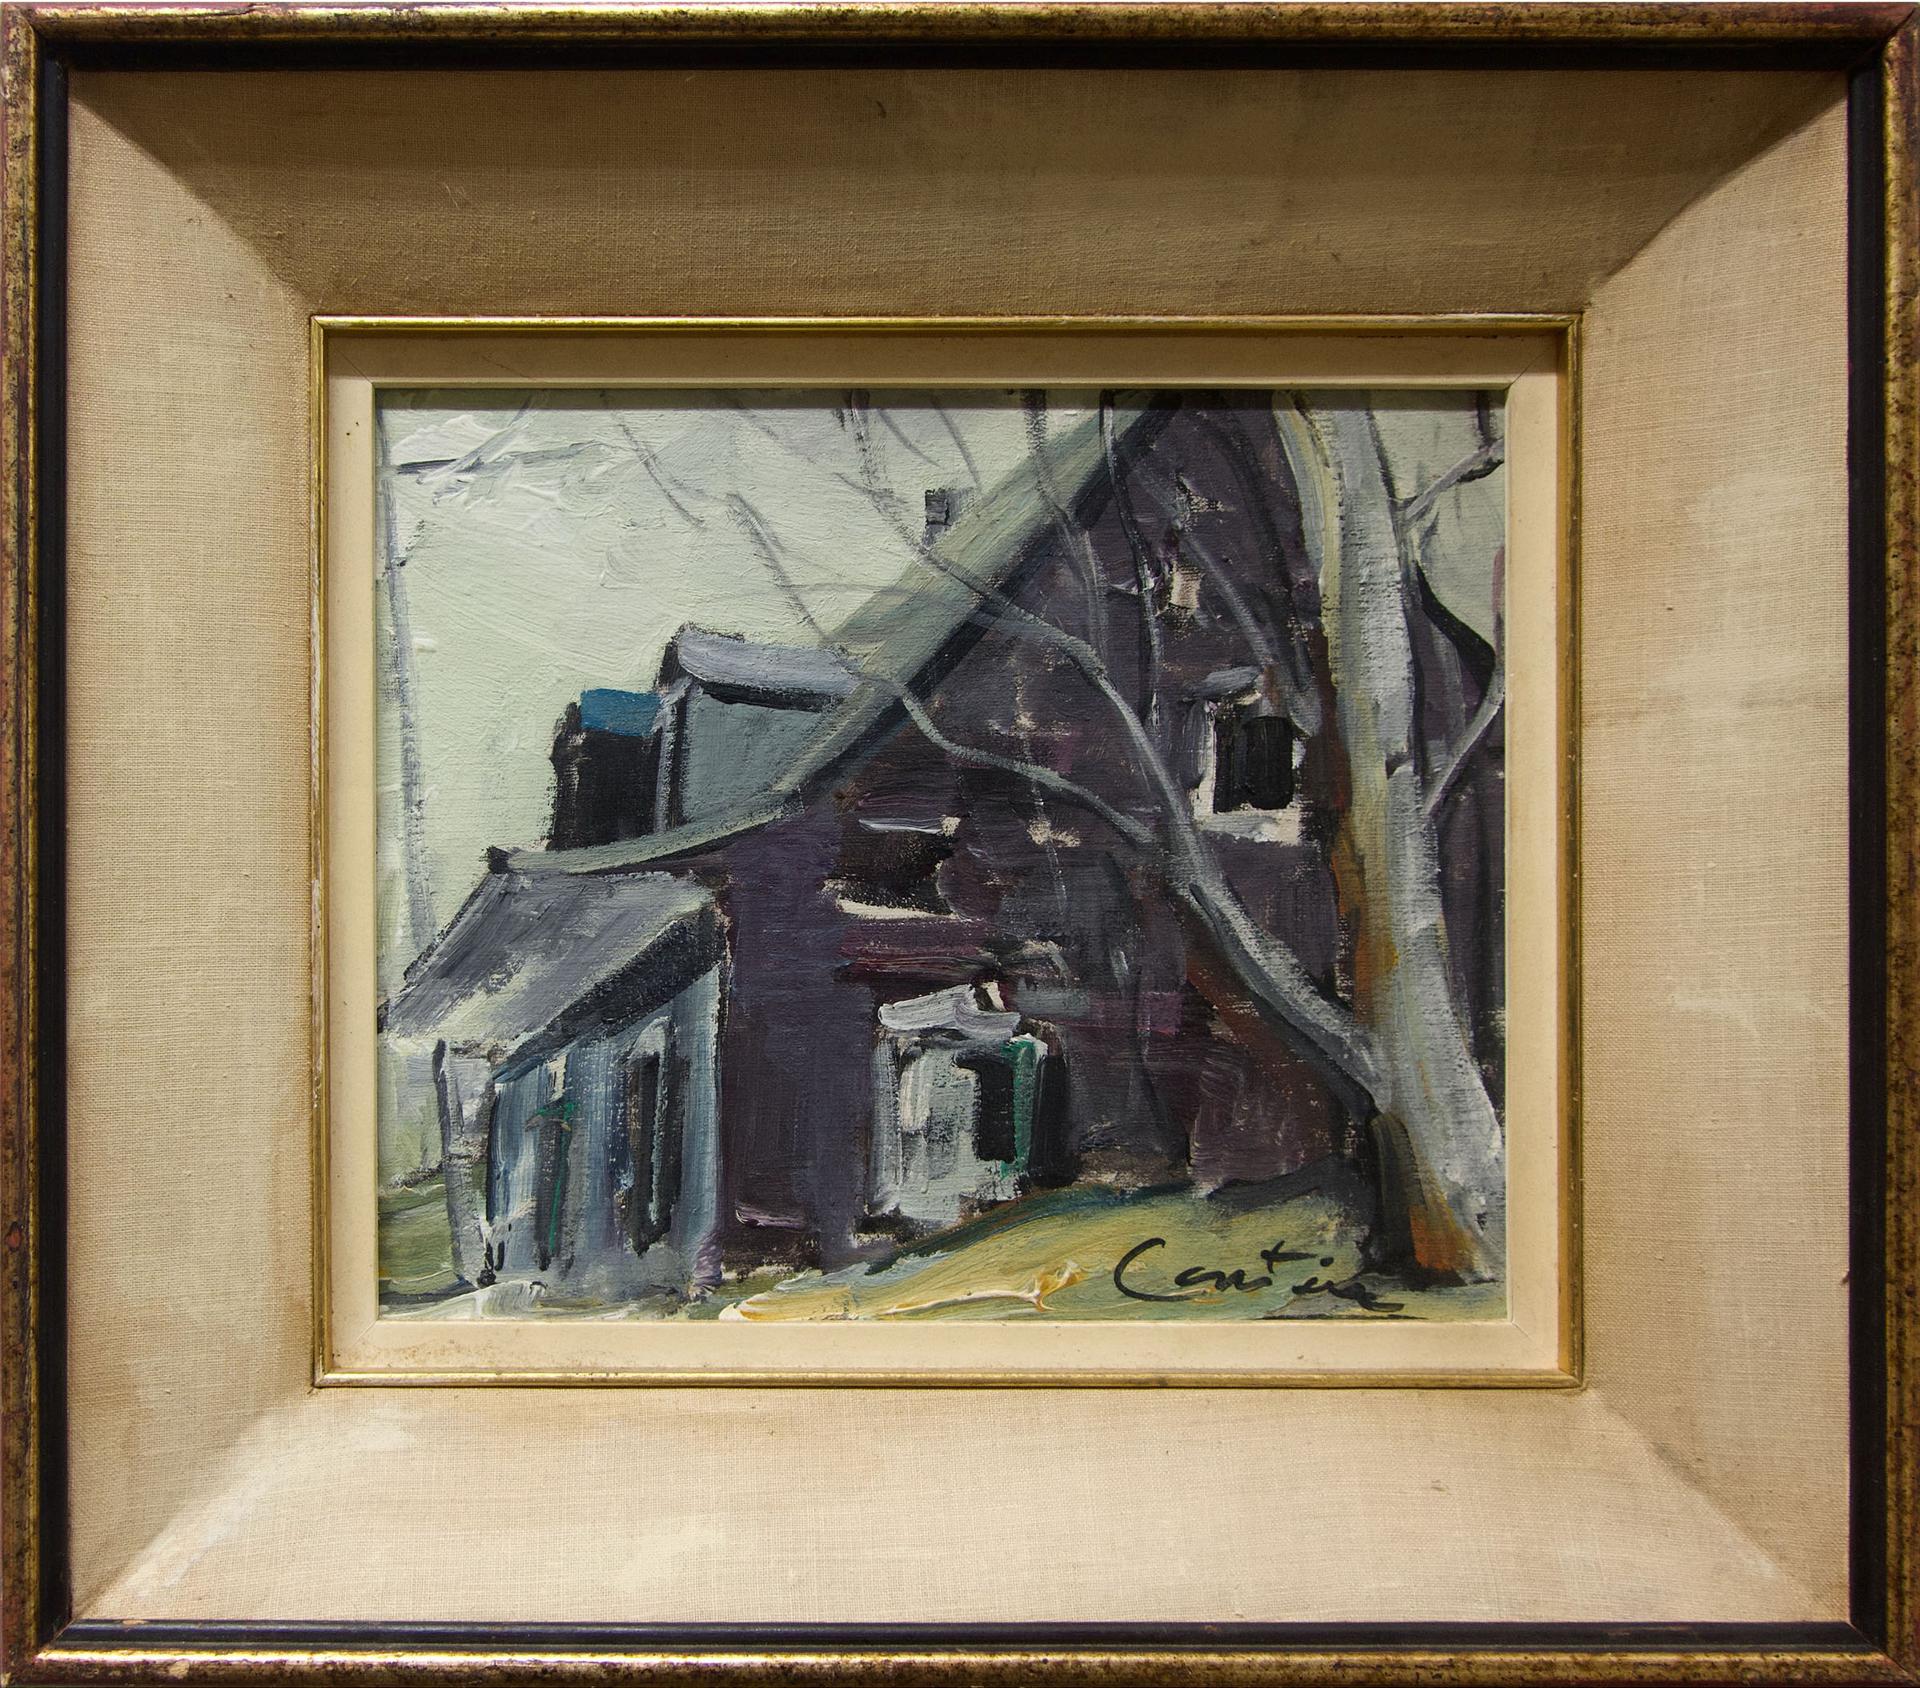 Roger Cantin (1930) - The Old Homestead